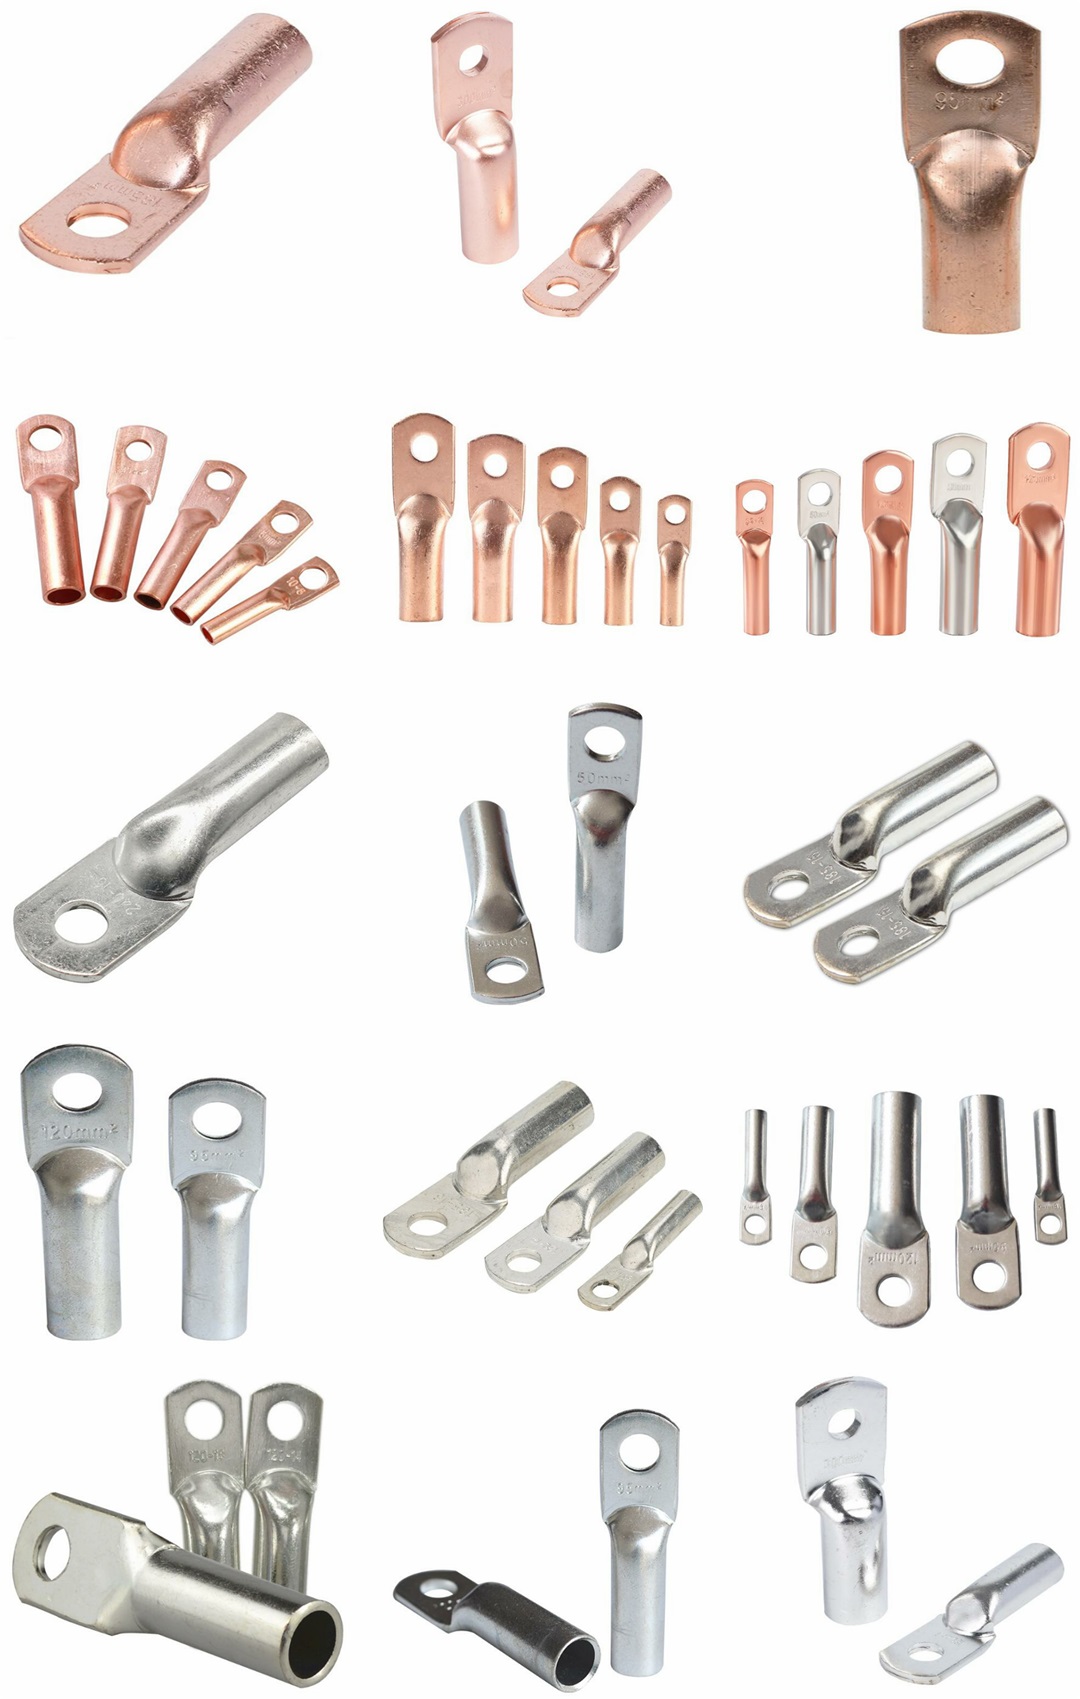 copper connecting terminal  cable lugs